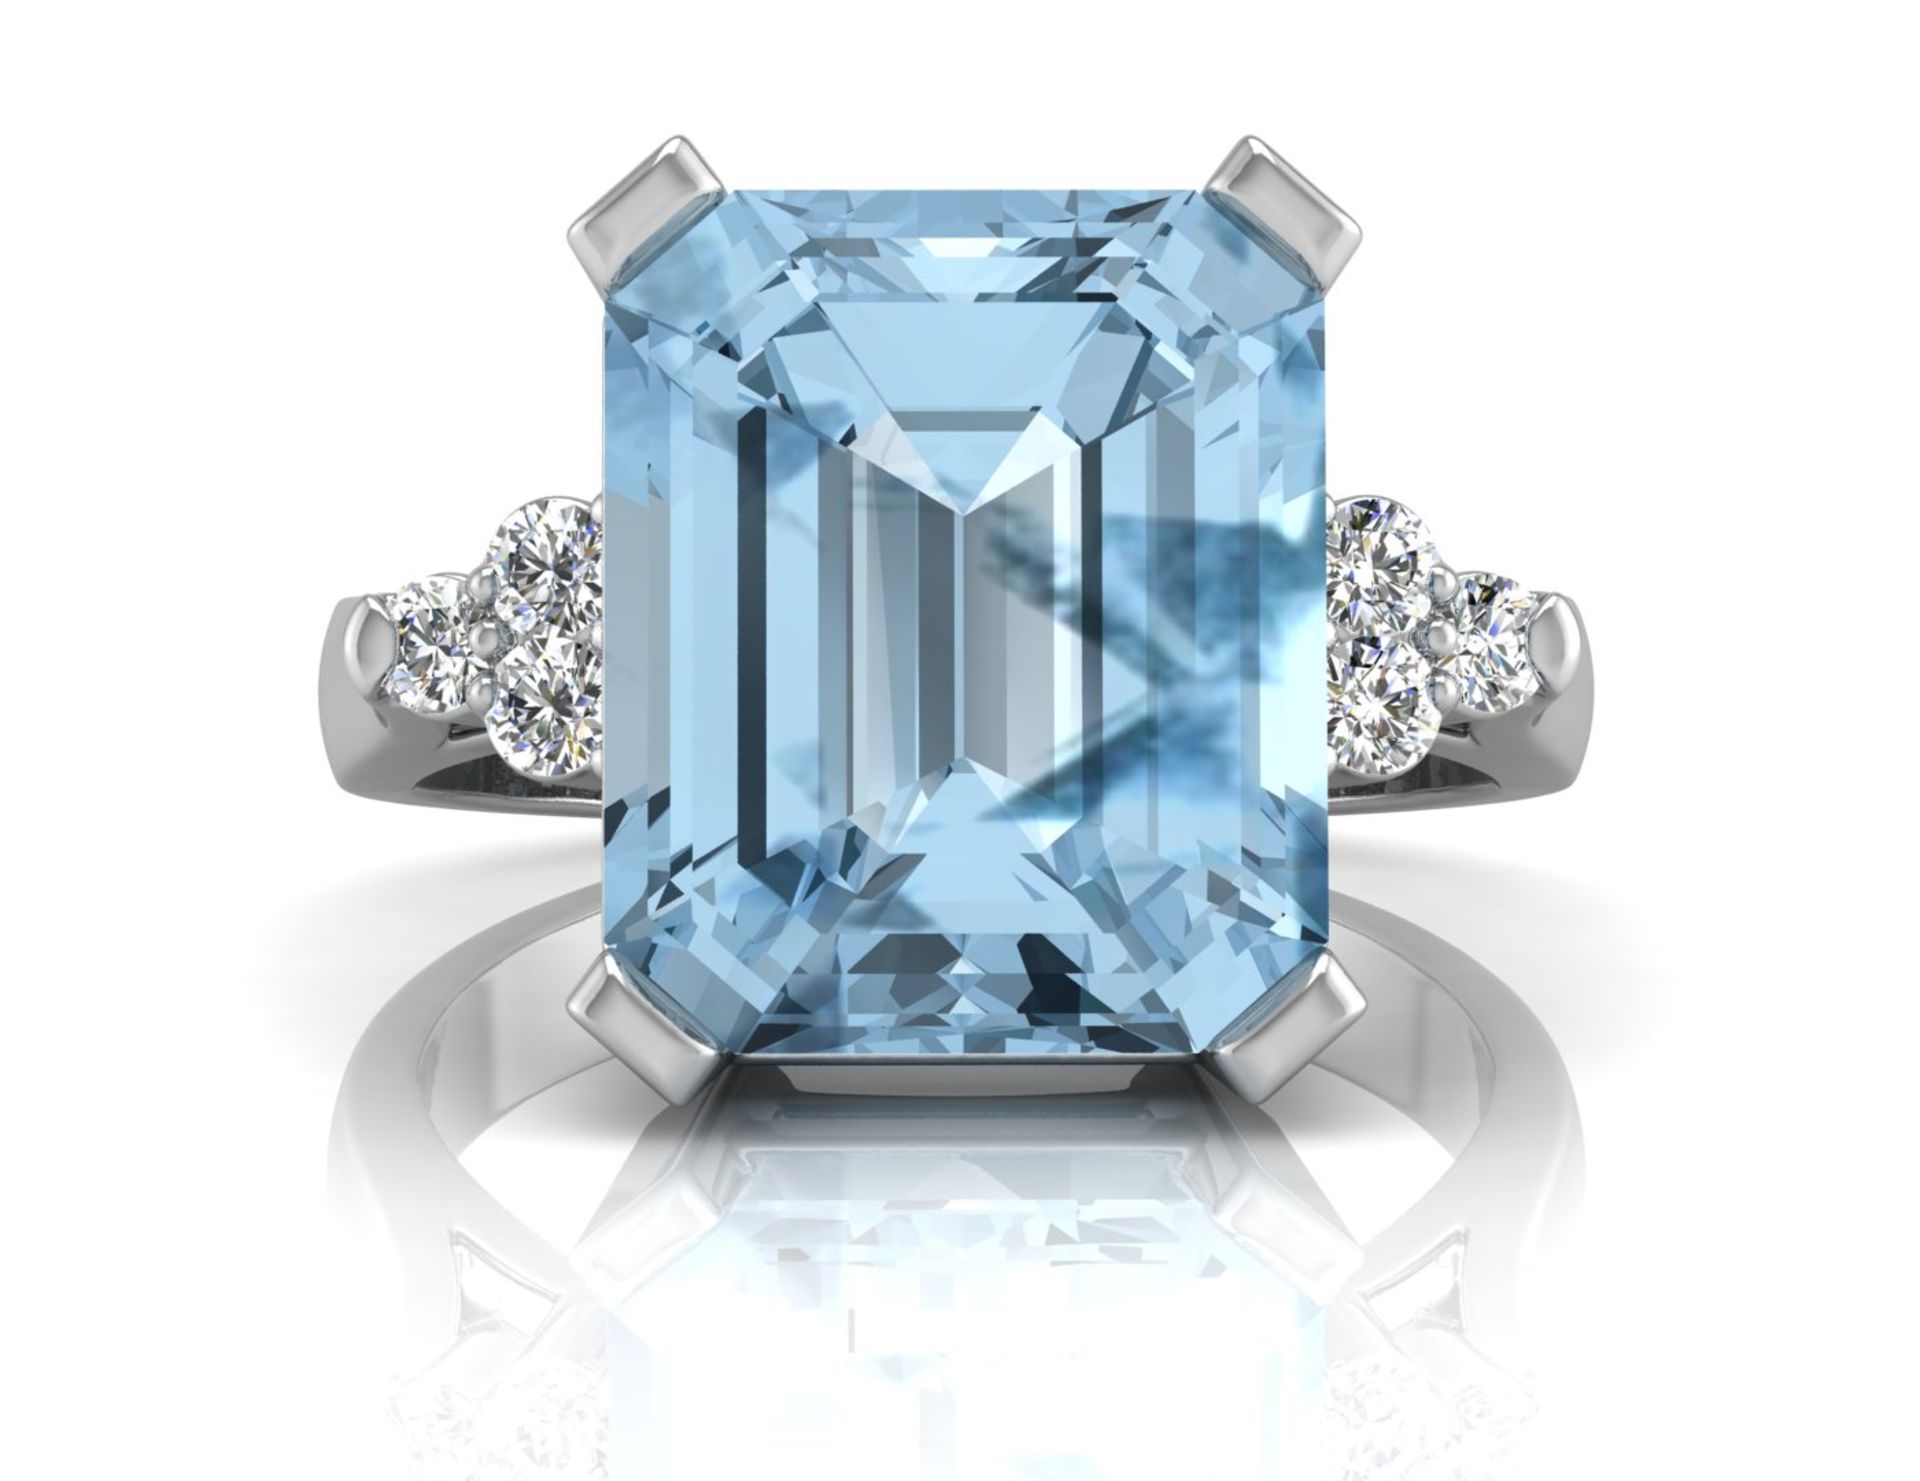 9ct White Gold Diamond And Blue Topaz Ring 0.18 Carats - Valued by AGI £1,645.00 - This stunning - Image 4 of 4